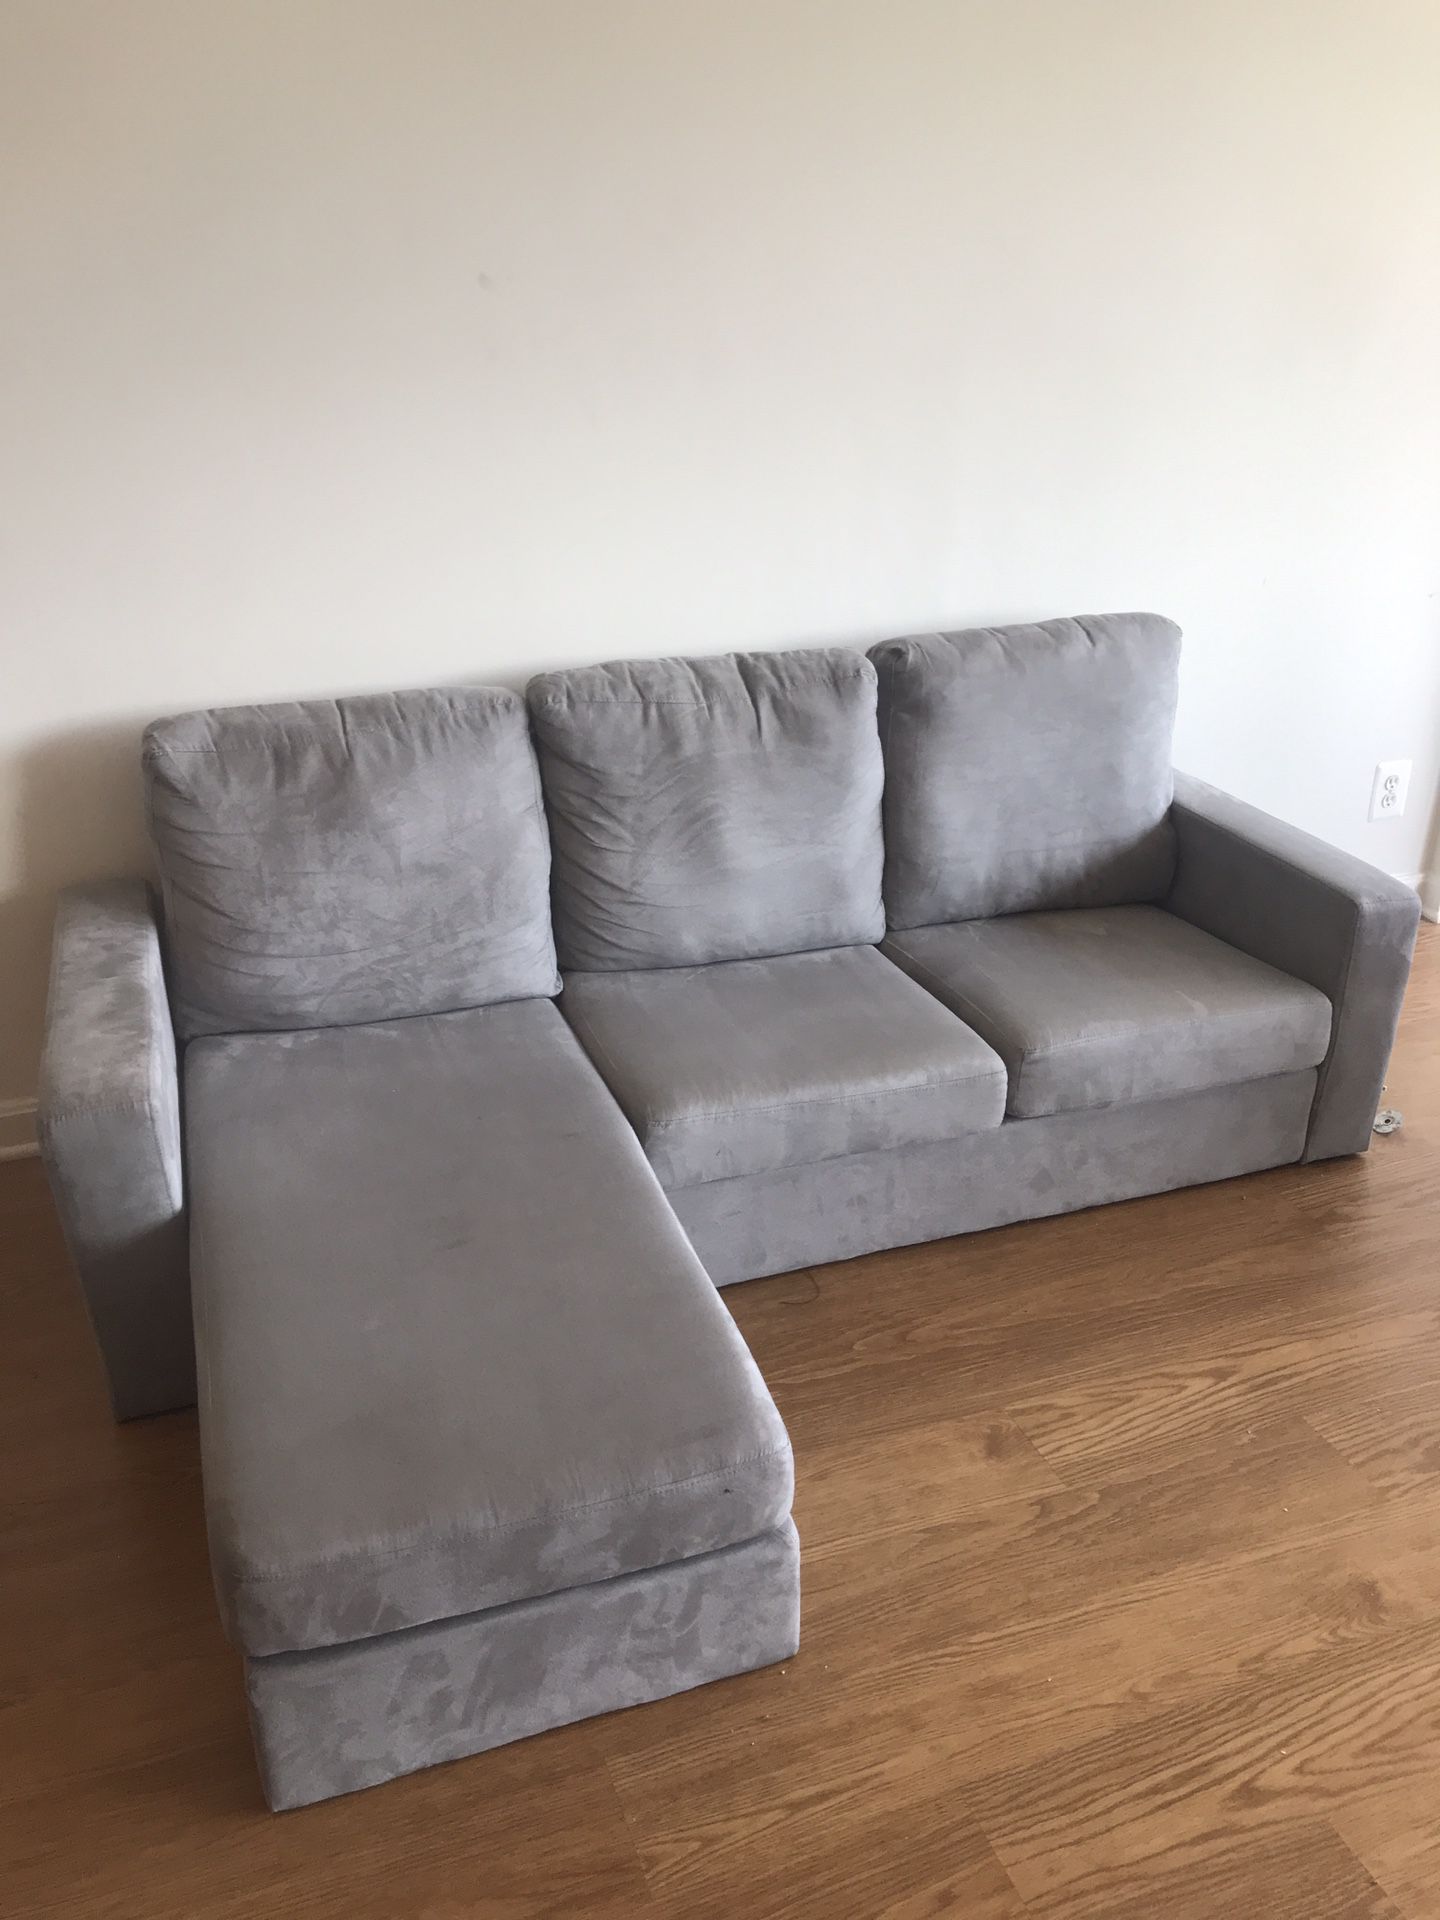 GREY USED COUCH